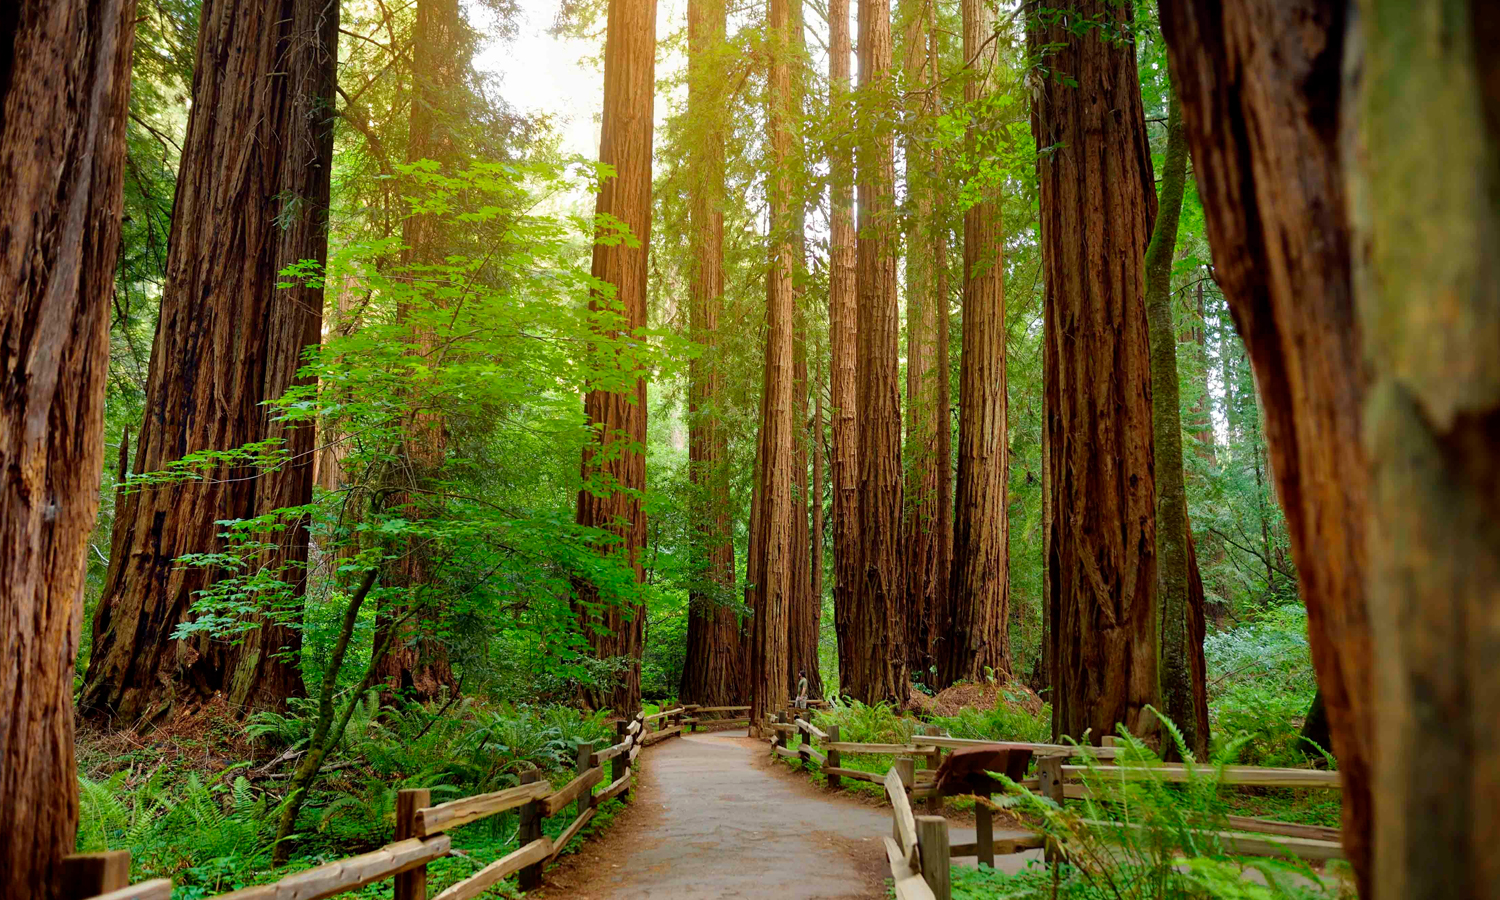 Is Hiking the Answer to All Your Questions? Go for a Hike in the Redwood National Park to Recharge Your Soul